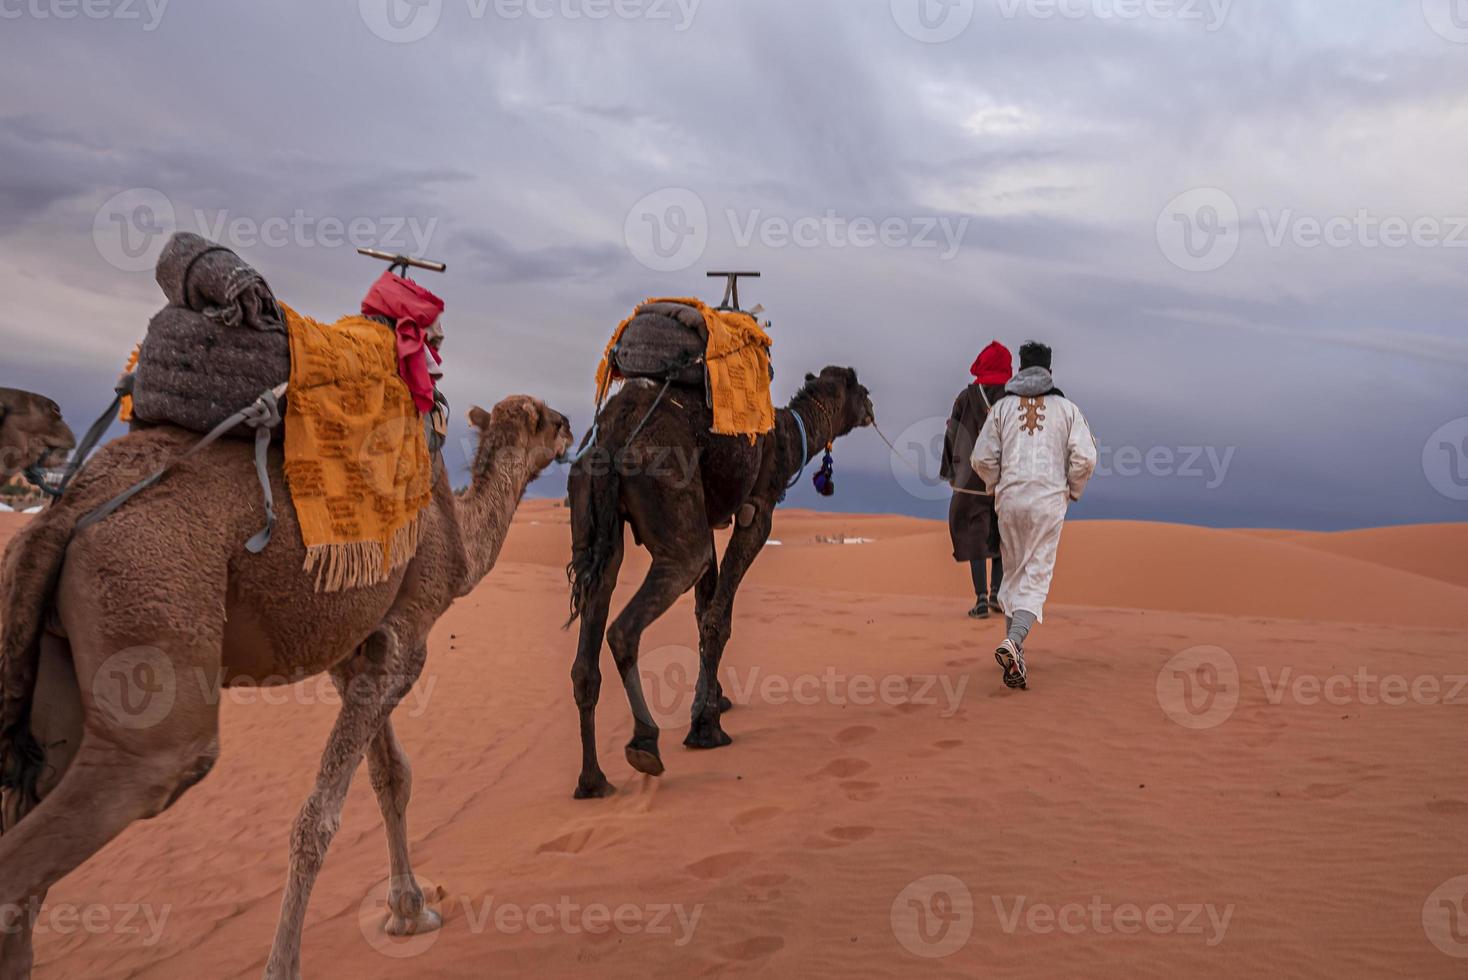 Bedouins in traditional dress leading camels through the sand in desert photo